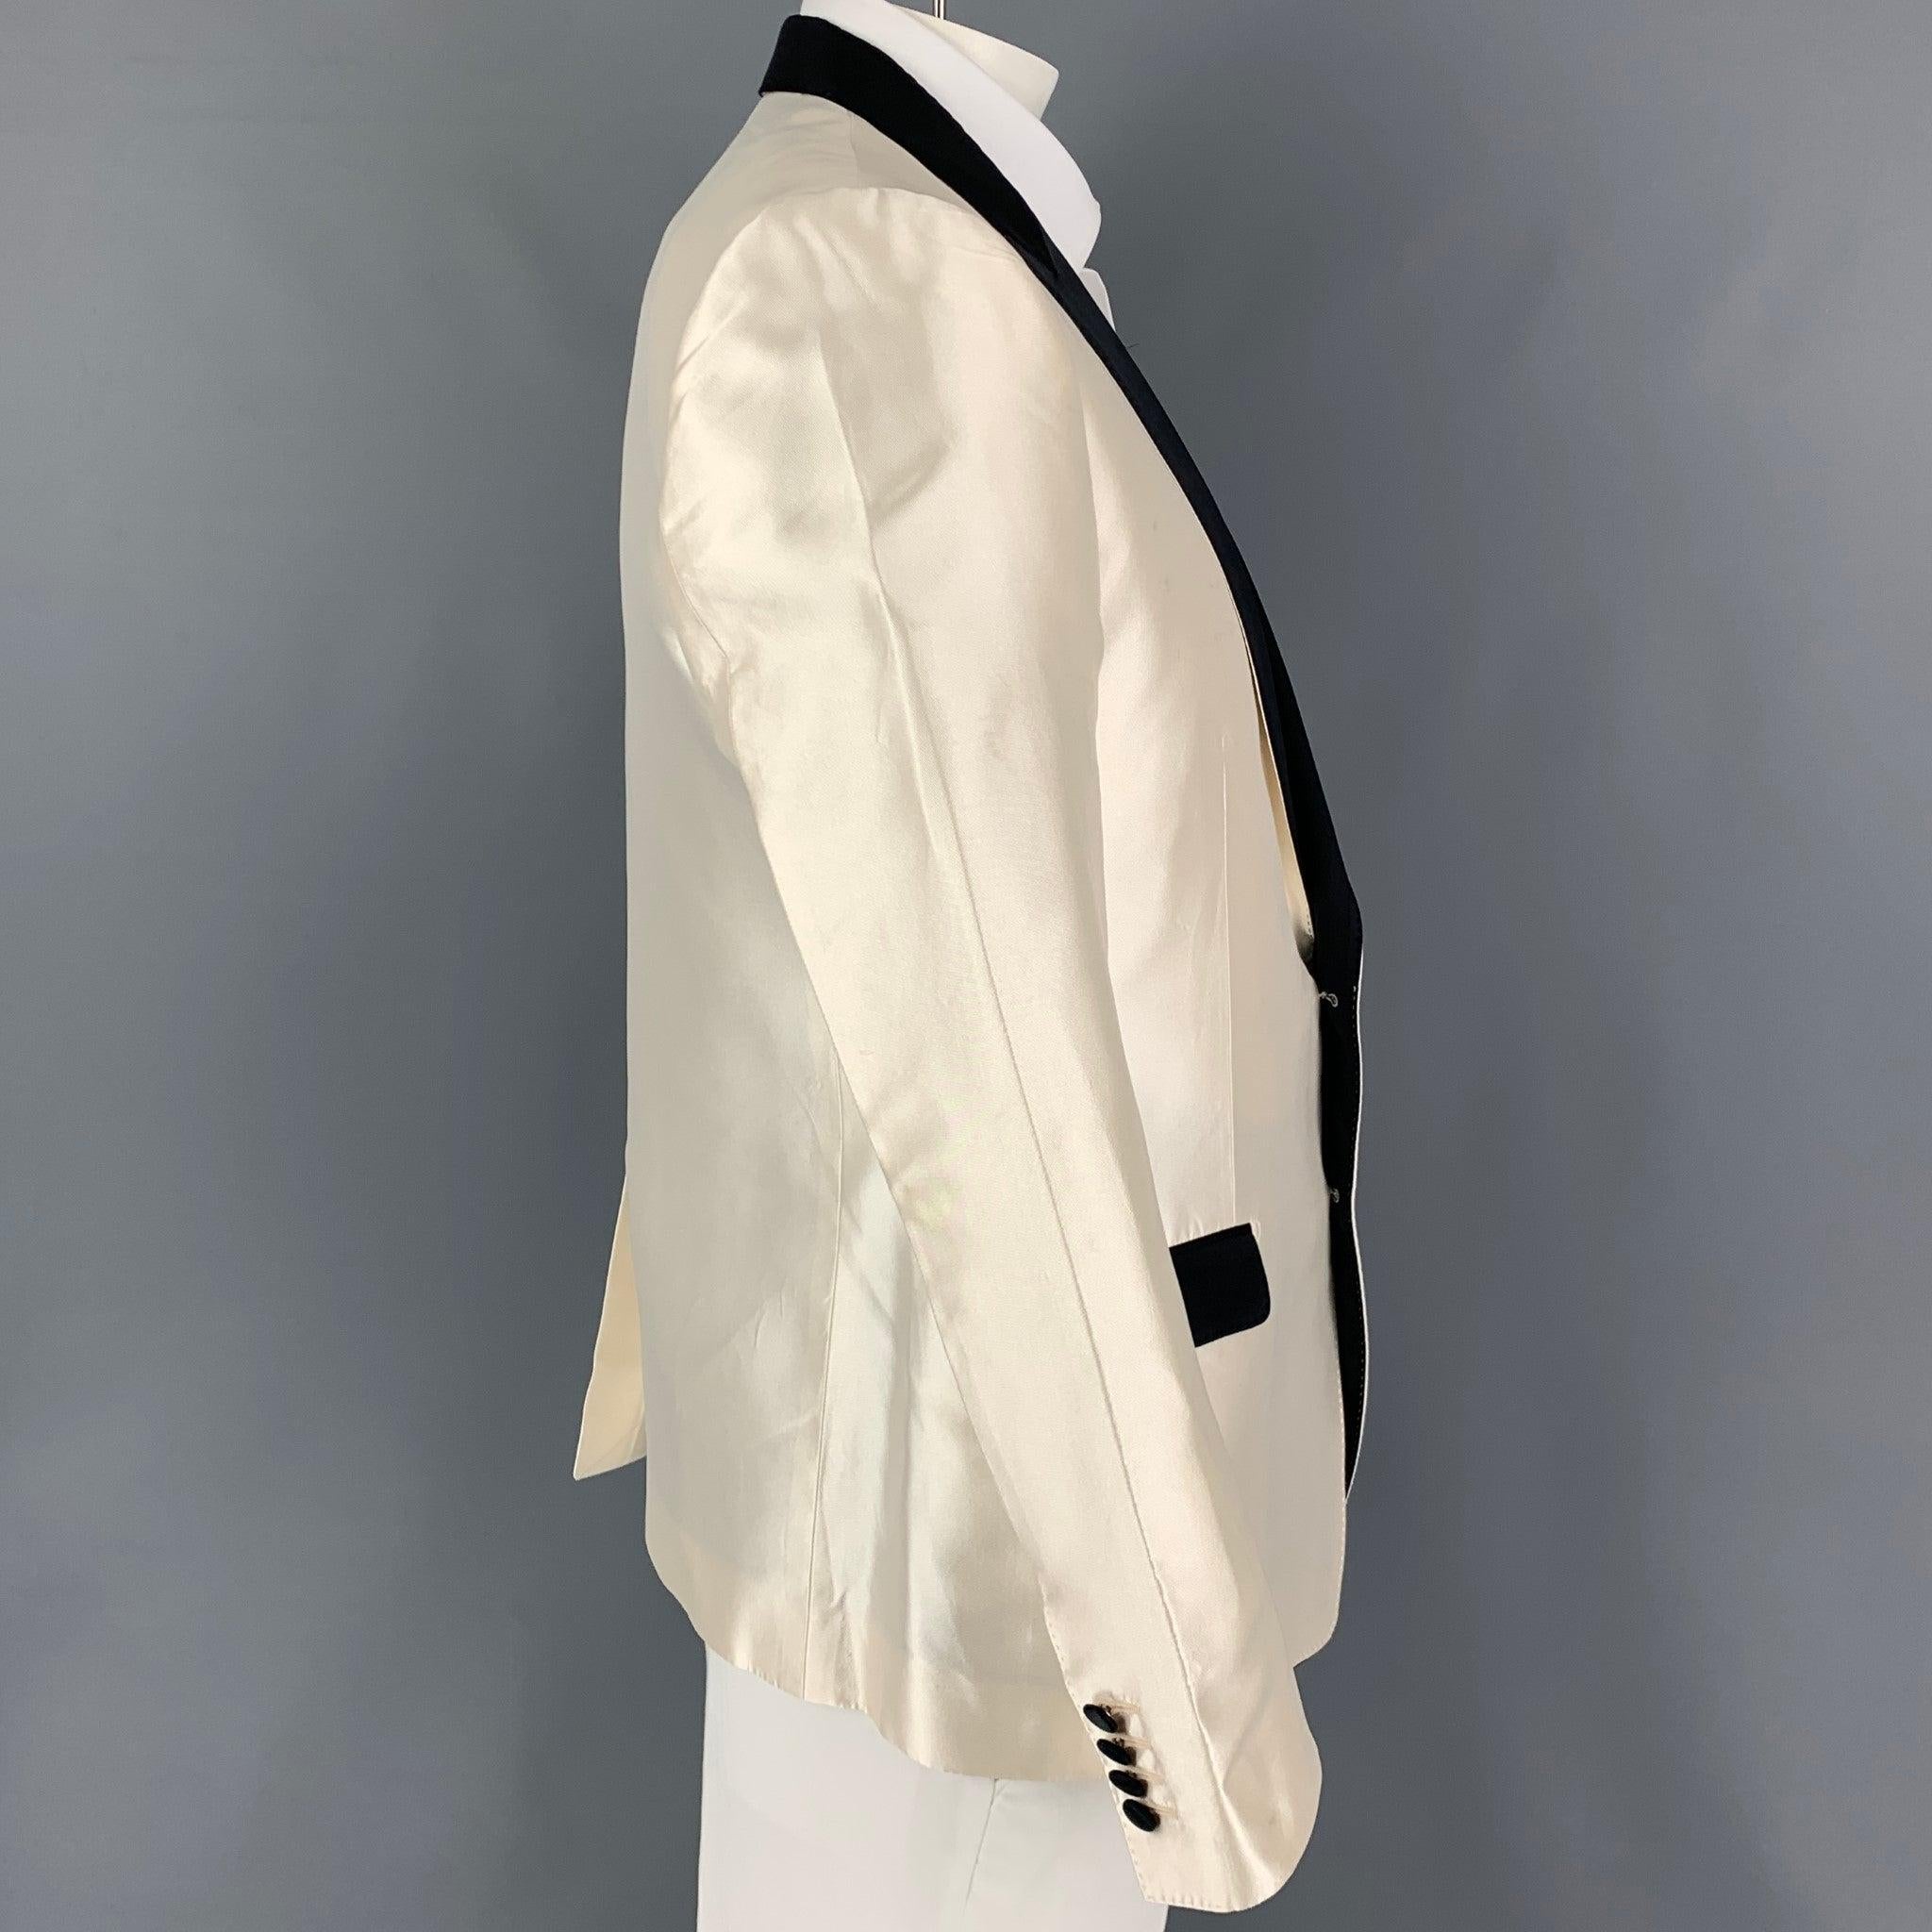 DOLCE & GABBANA sport coat comes in a beige & black silk blend with a full liner featuring a peak lapel, flap pockets, single back vent, and a double button closure. Made in Italy.
Good
Pre-Owned Condition.
Moderate discoloration throughout. As-is. 